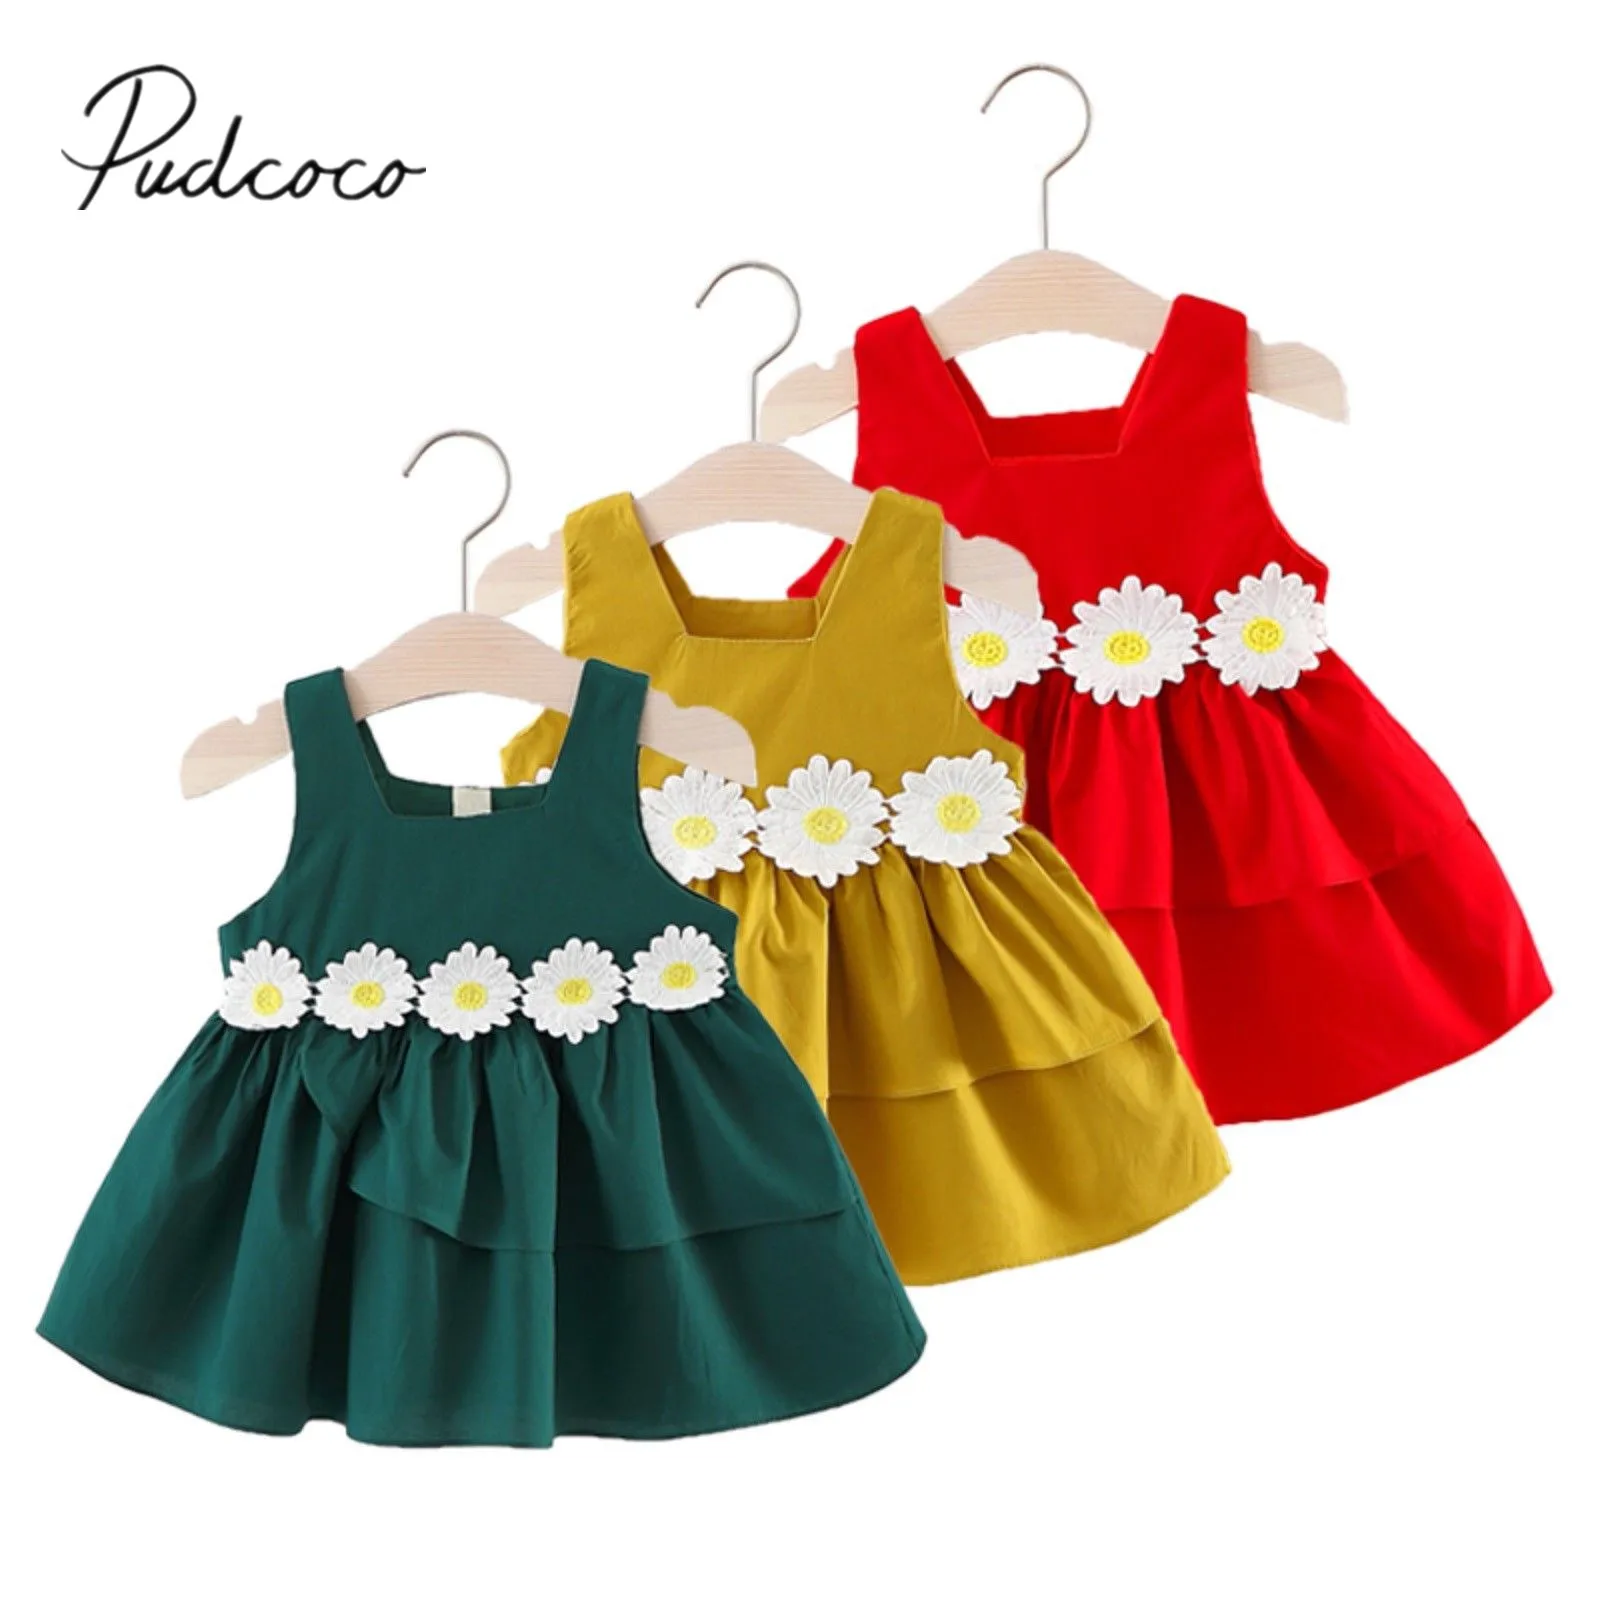 2018 Brand New Toddler Infant Kids Baby Flower Girls Dress Lace Floral Tulle Party Pageant Dresses Girl Flower Sundress 3M-3T